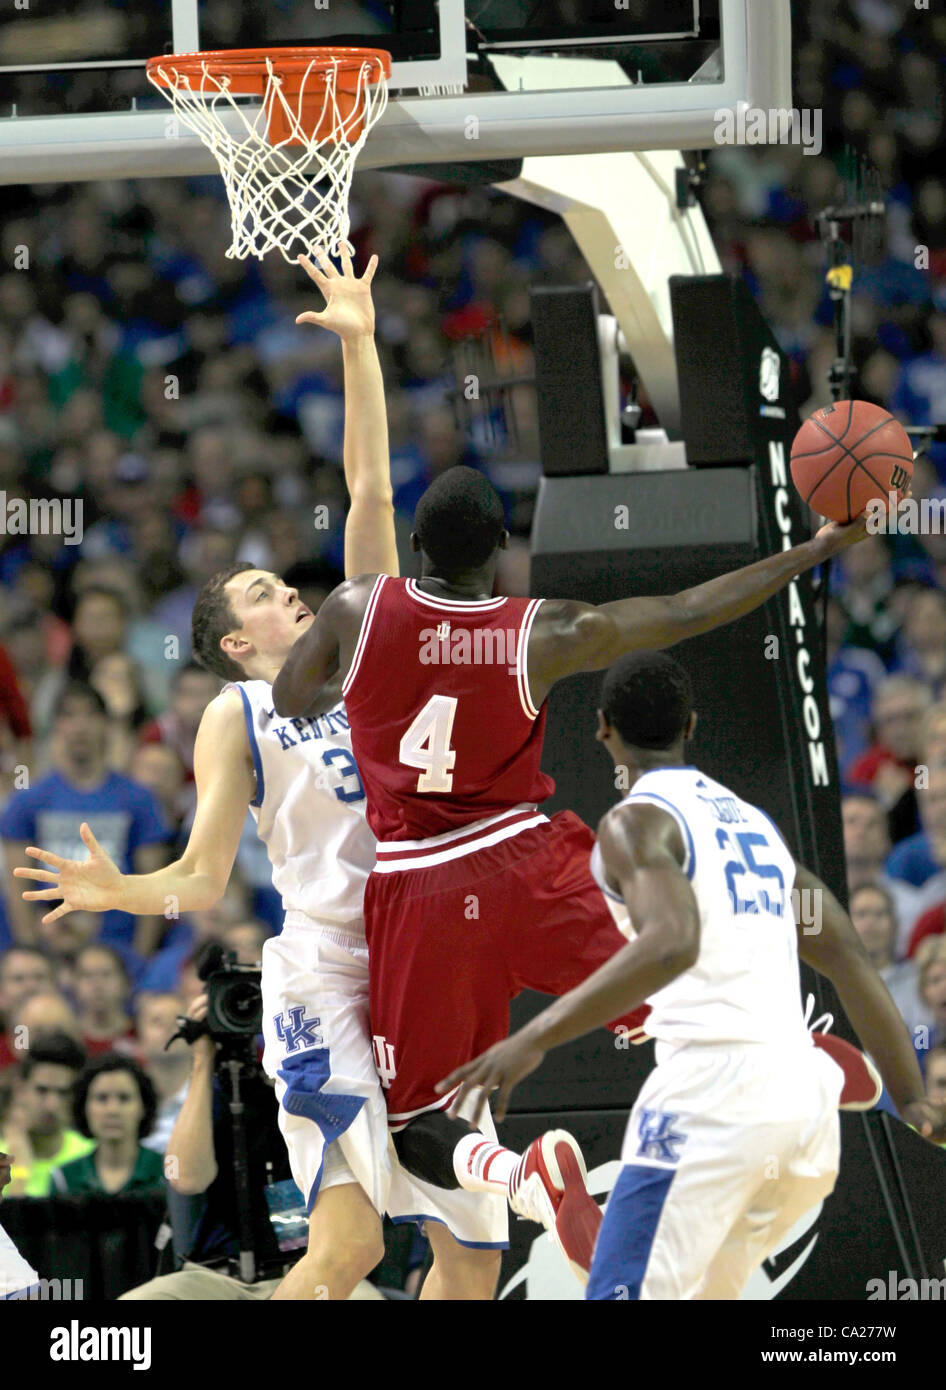 March 23, 2012 - Atlanta, GA, USA - Indiana Hoosiers guard Victor Oladipo (4) scored on a drive into Kentucky Wildcats forward Kyle Wiltjer (33) as the University of Kentucky played Indiana University in the NCAA South Regional semifinal the Georgia Dome in Atlanta, Ga., Friday, March 23, 2012.  Thi Stock Photo